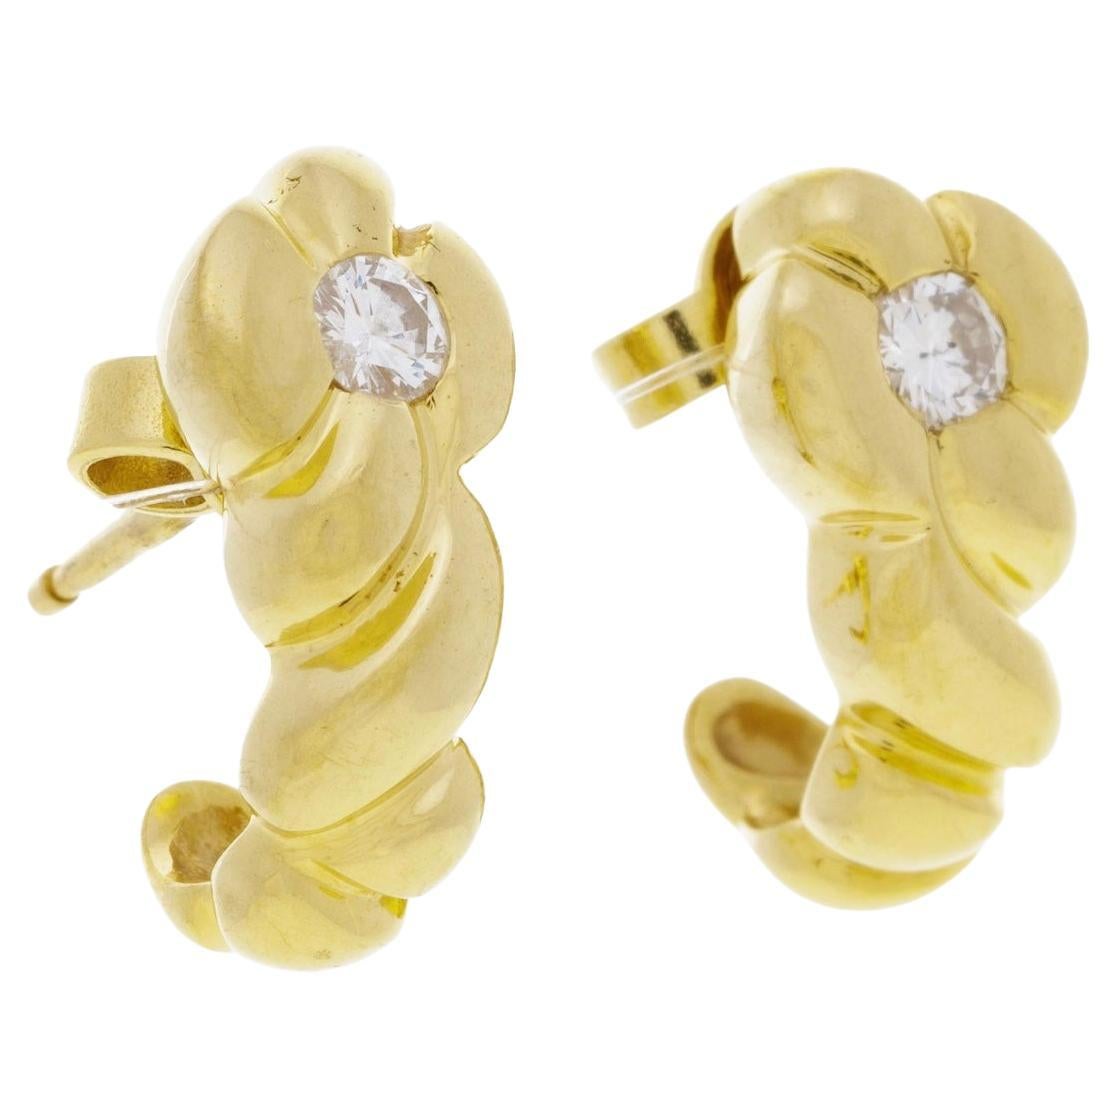 Pair of 750 Gold Earrings Set with Brilliant Cut Diamonds